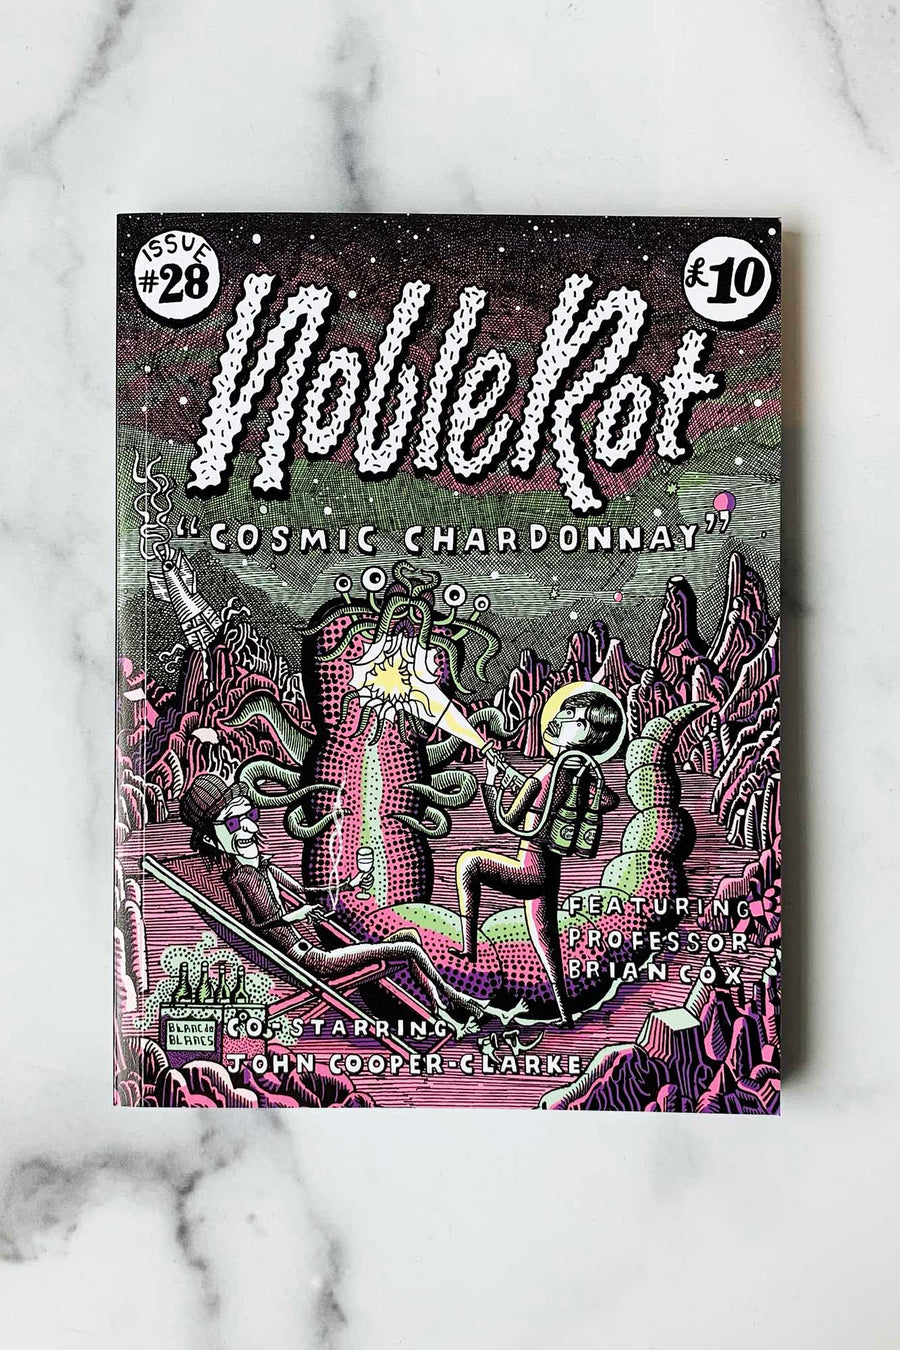 Noble Rot Issue 28